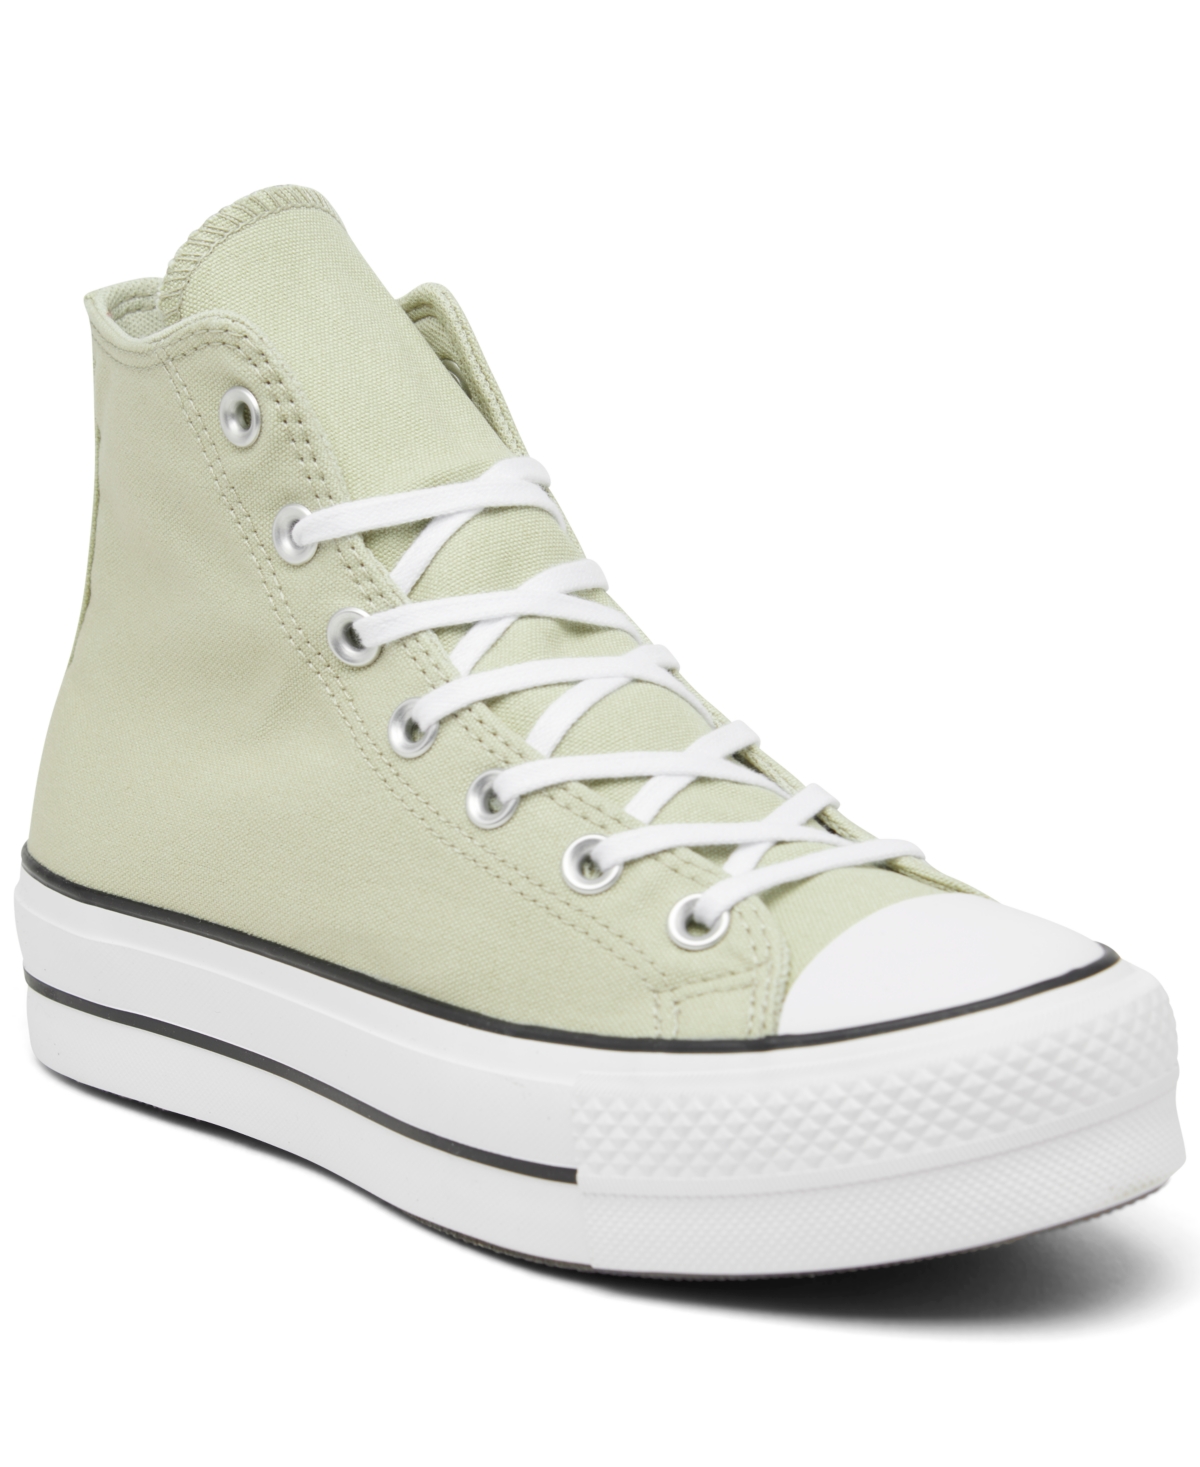 CONVERSE WOMEN'S CHUCK TAYLOR ALL STAR LIFT PLATFORM HIGH TOP CASUAL SNEAKERS FROM FINISH LINE